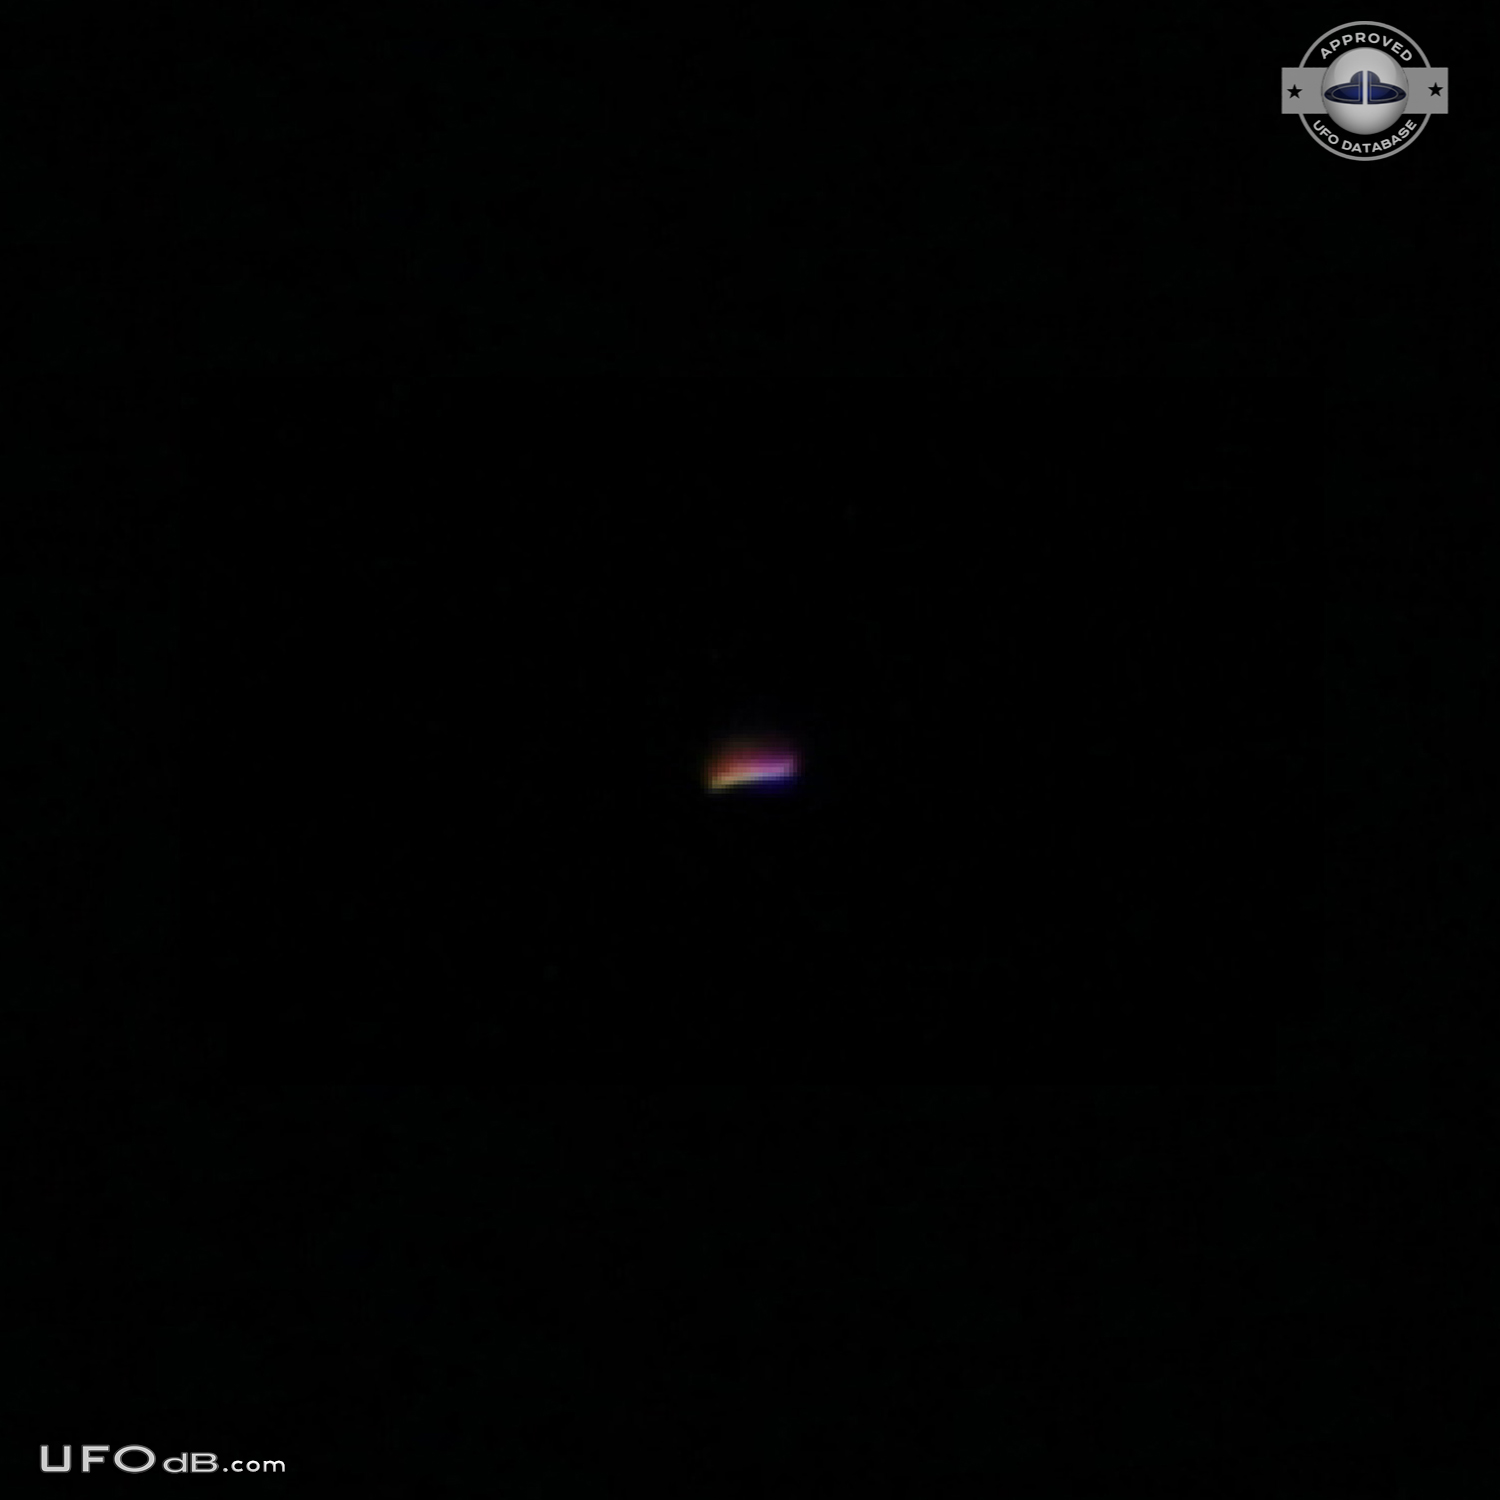 Bright mufti-colored flashing pulsating UFO on pictures - Florida 2012 UFO Picture #524-3